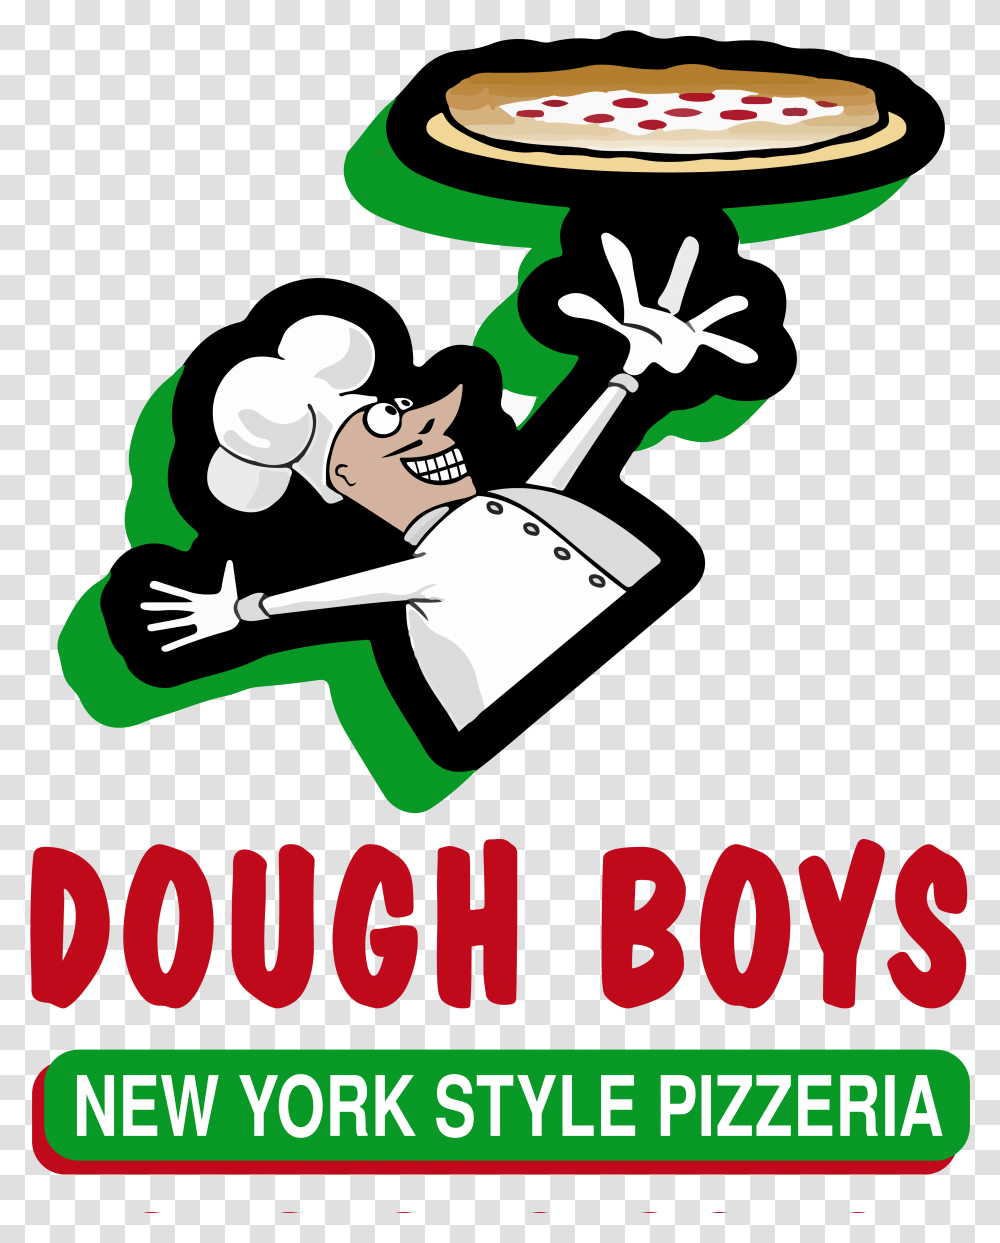 Cartoon Pizza City Of North York, Performer, Poster, Advertisement Transparent Png